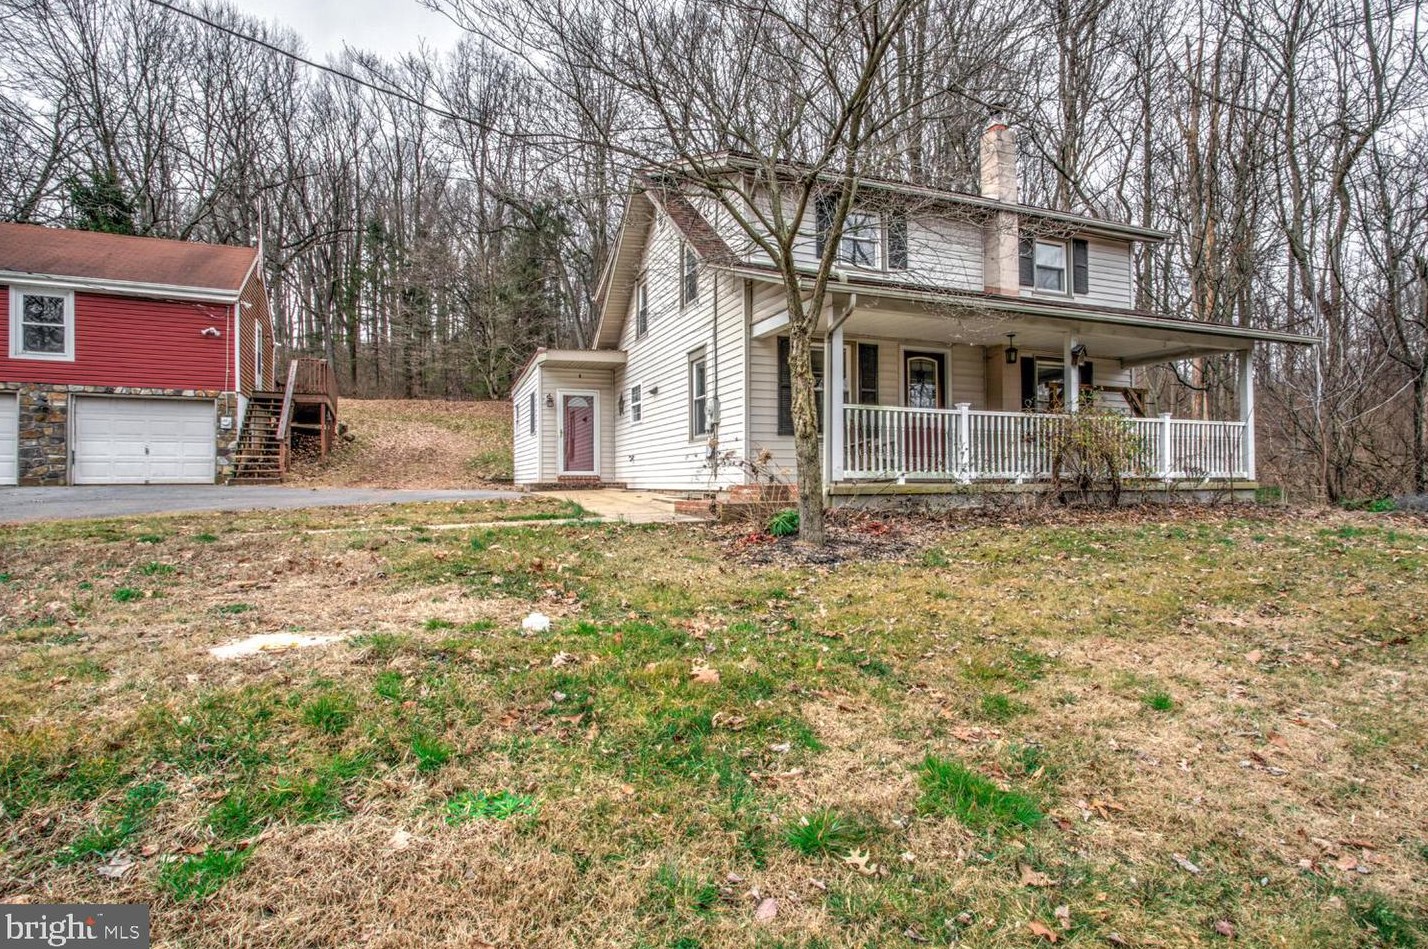 1385 S Cocalico Rd, Fivepointville, PA 17517